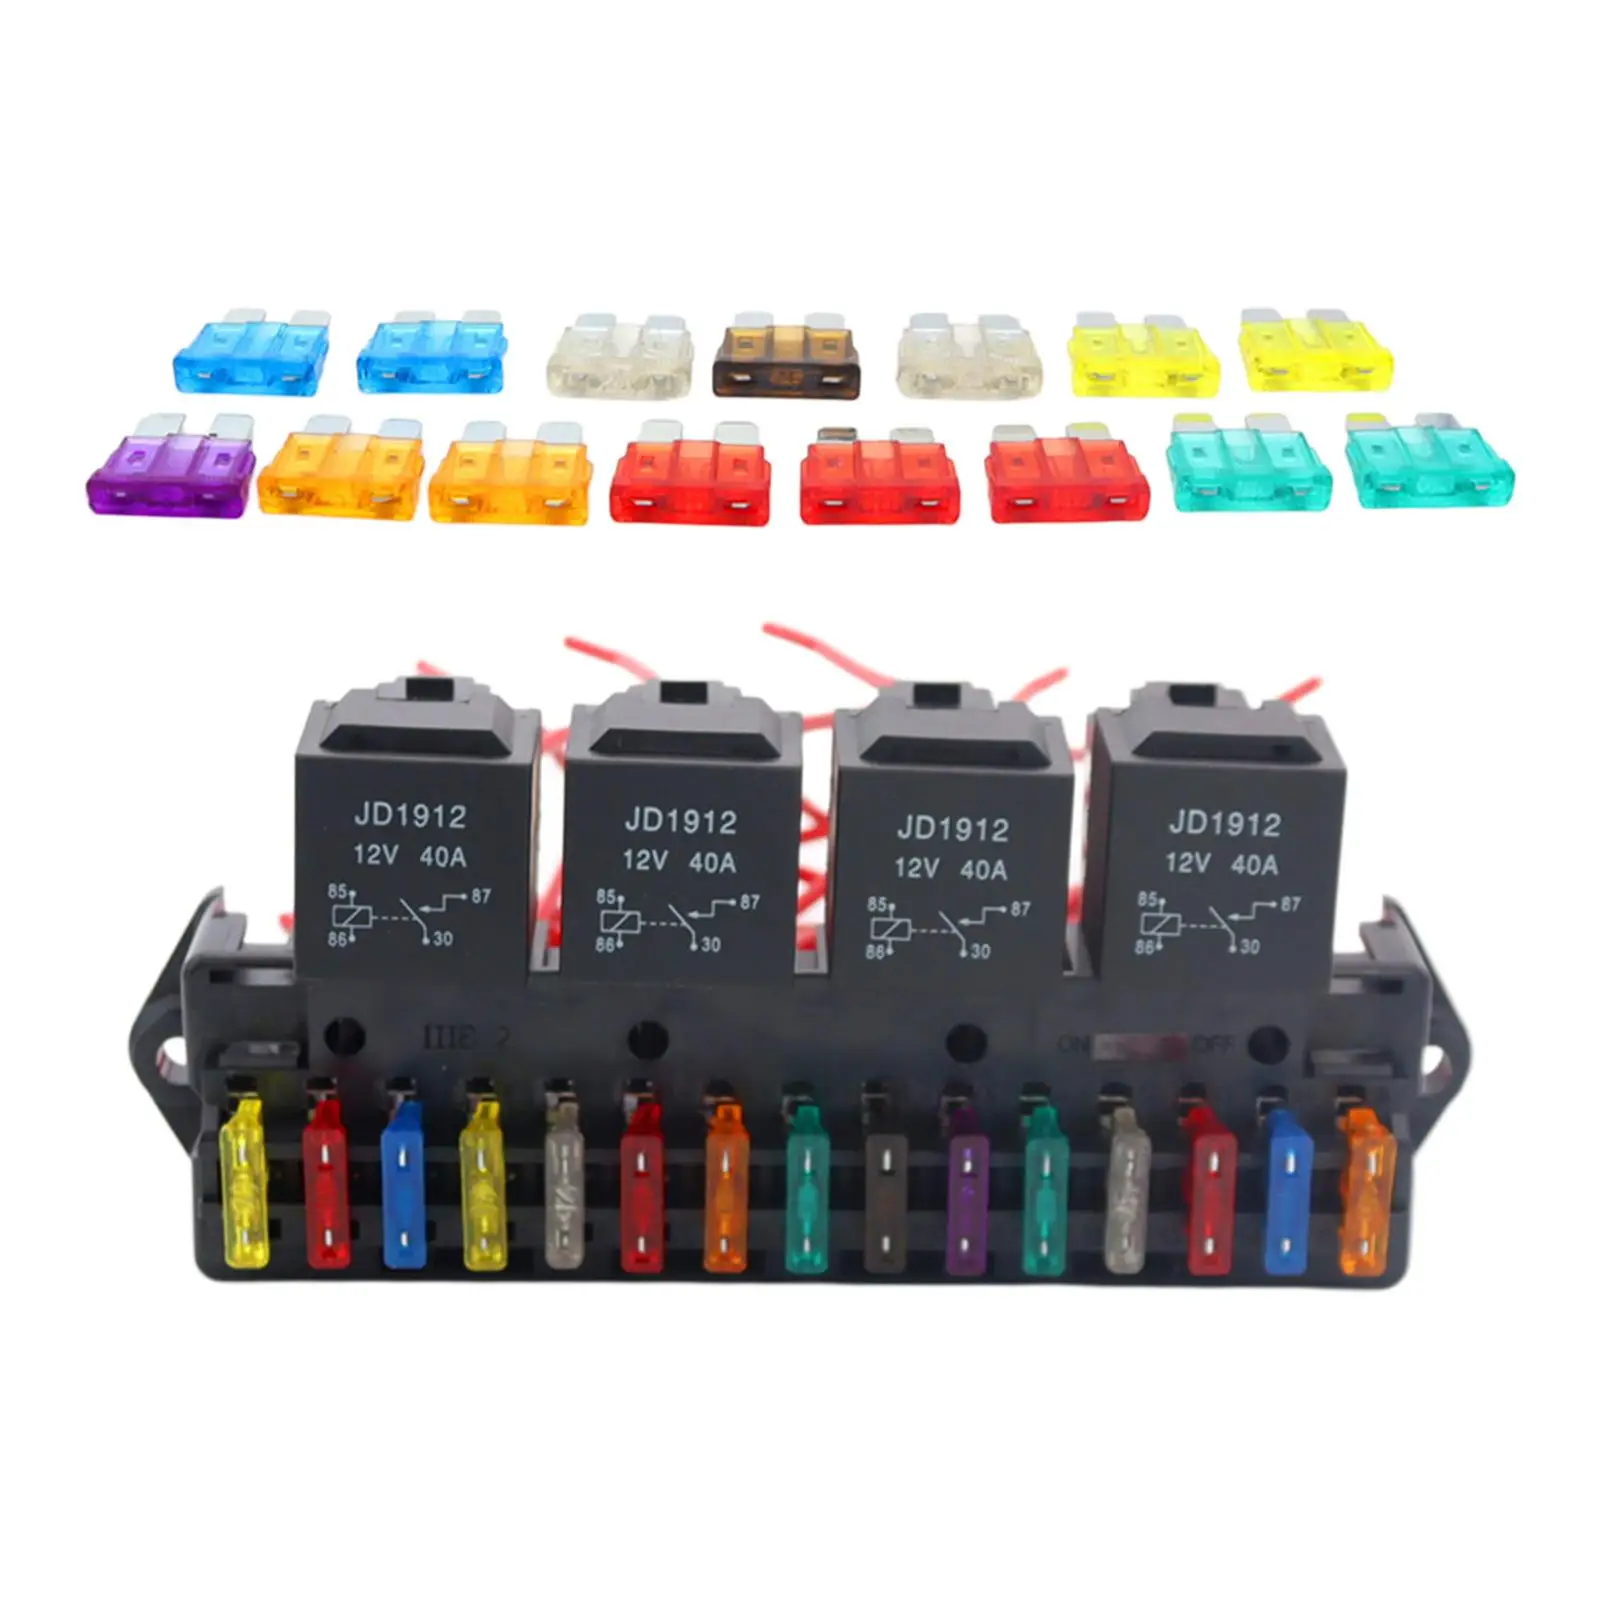 15-Way Car Fuse Box Block Holder Harness Assembly Wiring Multi Circuit Socket Base for Marine Boat Auto Vehicle Bus